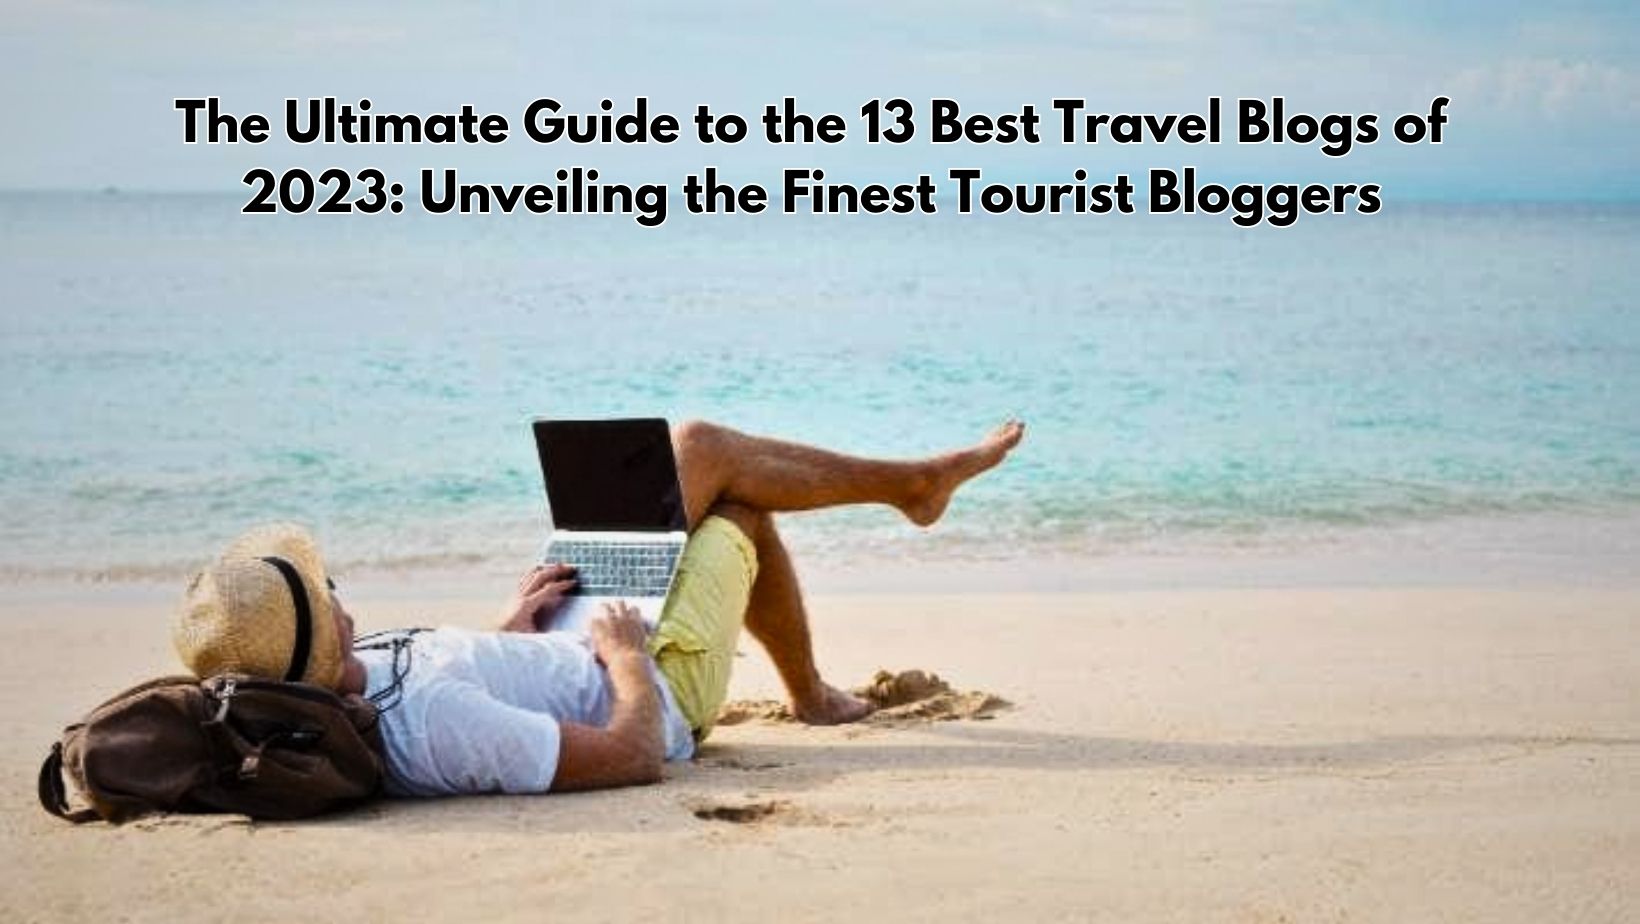 You are currently viewing The Ultimate Guide to the 13 Best Travel Blogs of 2023: Unveiling the Finest Tourist Bloggers